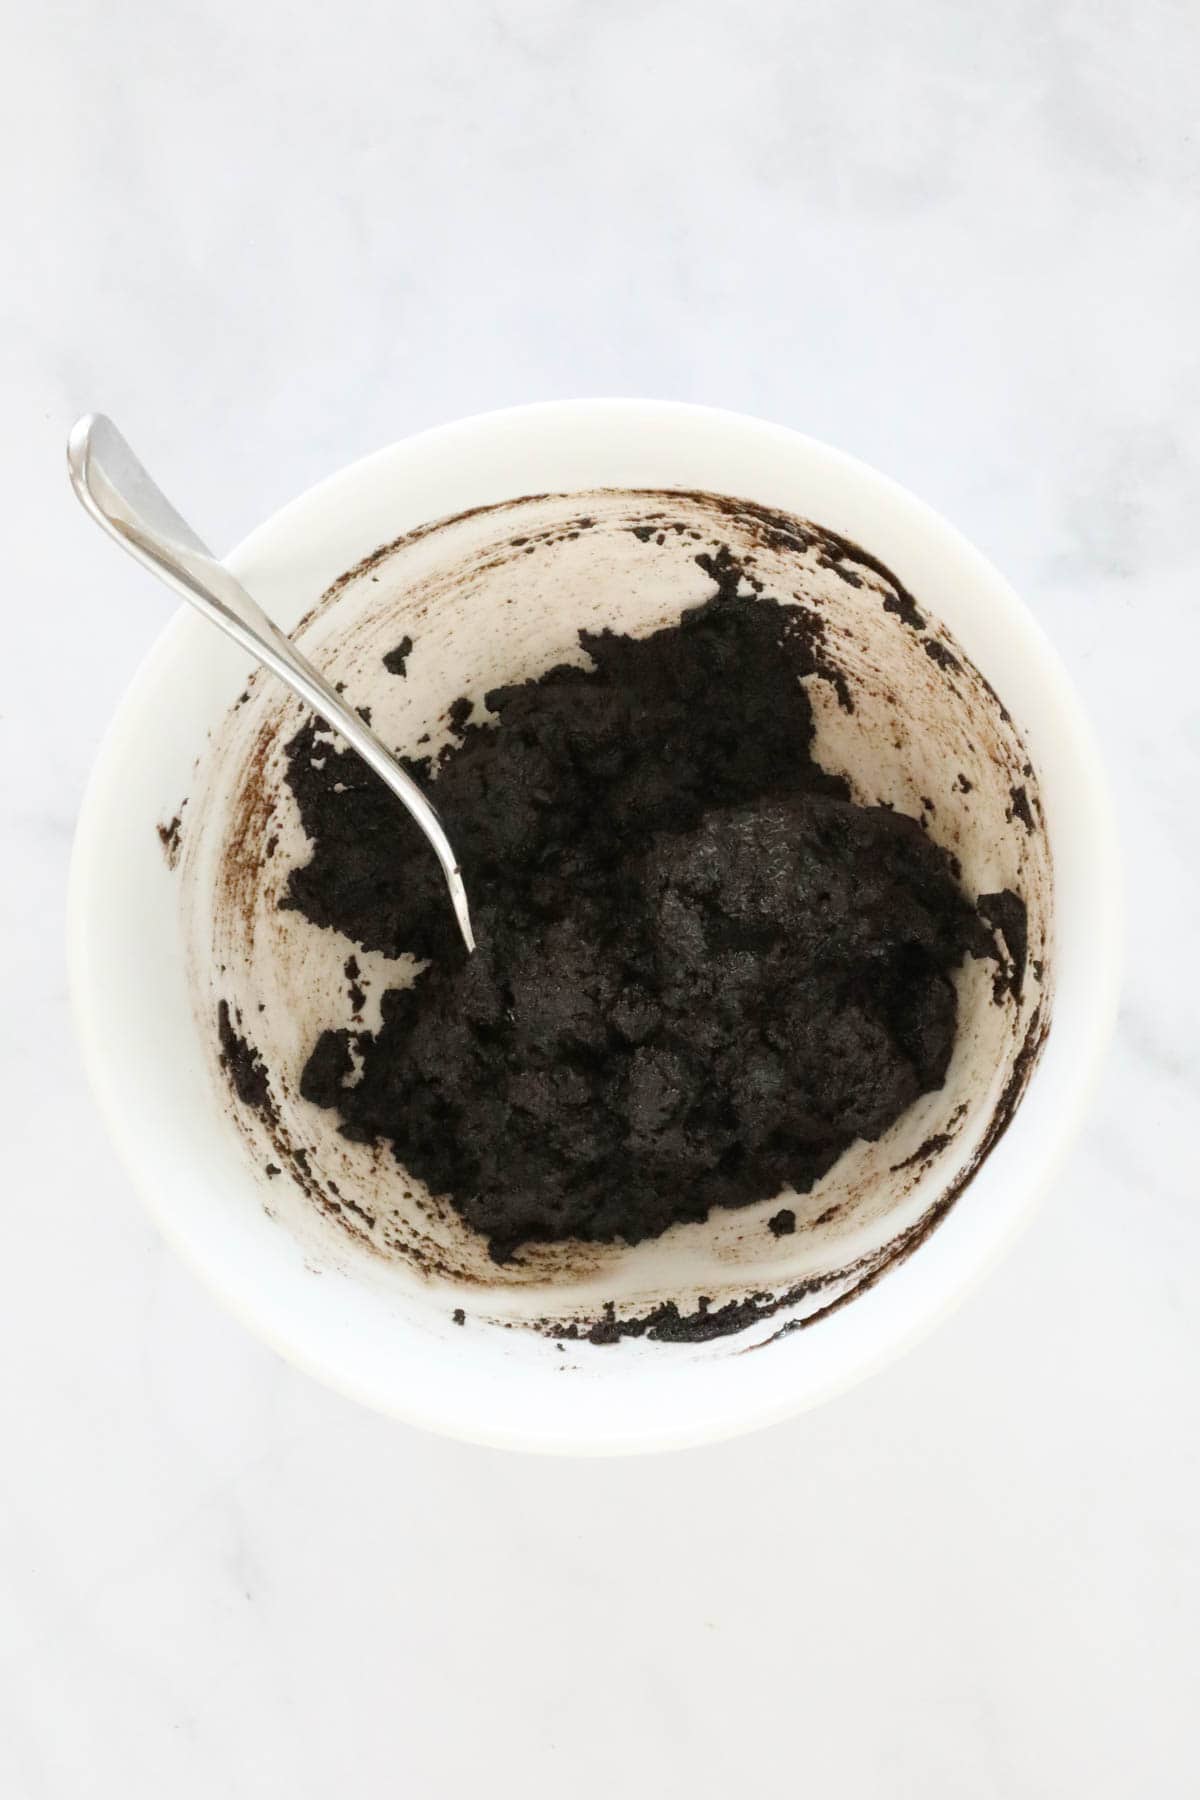 Melted butter mixed with crushed Oreo's in a mixing bowl.